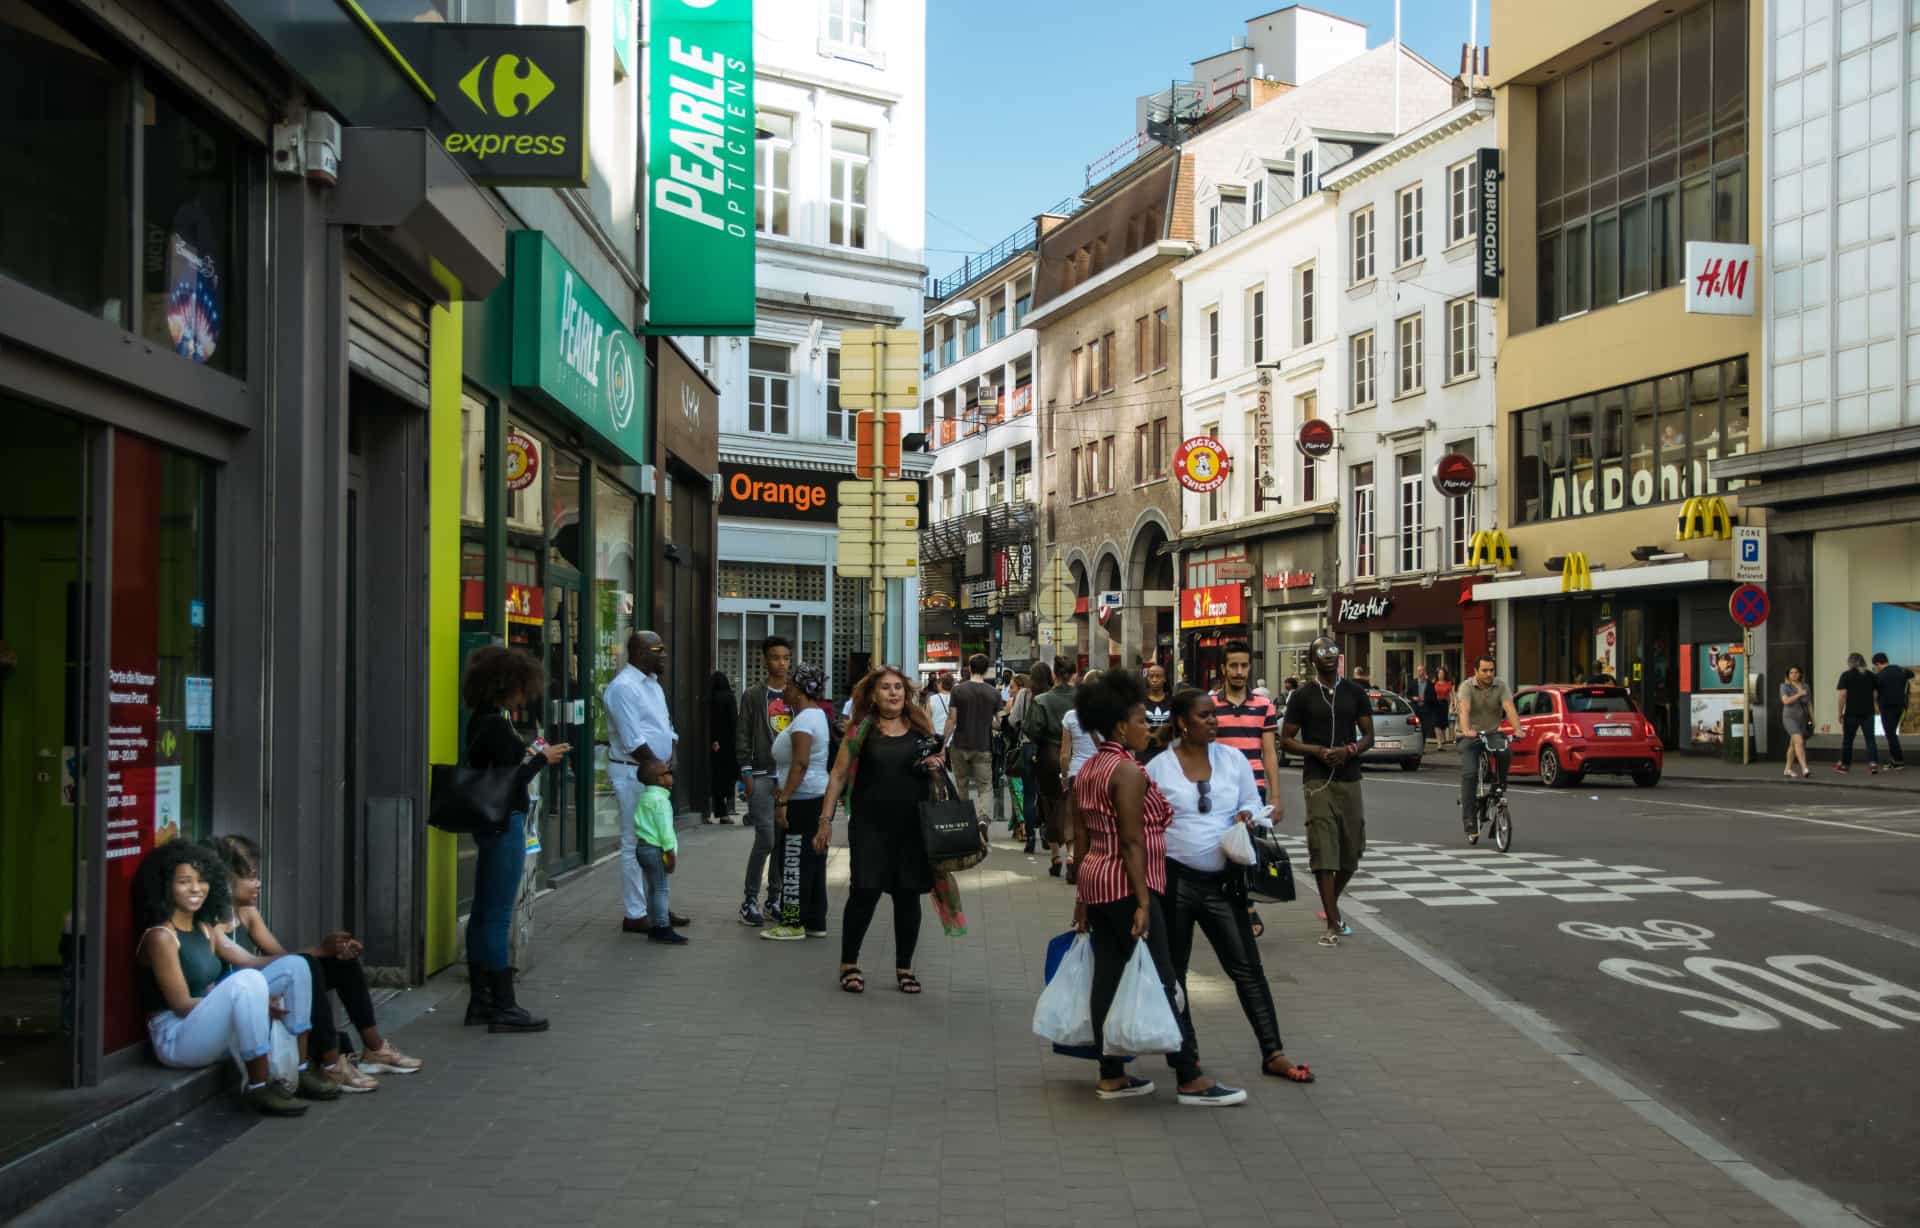 Brussels is known for its rich cultural diversity. Portuguese, Congolese, French, Moroccans, Turks... the list of different communities living together in Brussels is a long one! The neighborhoods of Matongé, Gare du Midi, and Châtelain reflect this melting pot of culture.